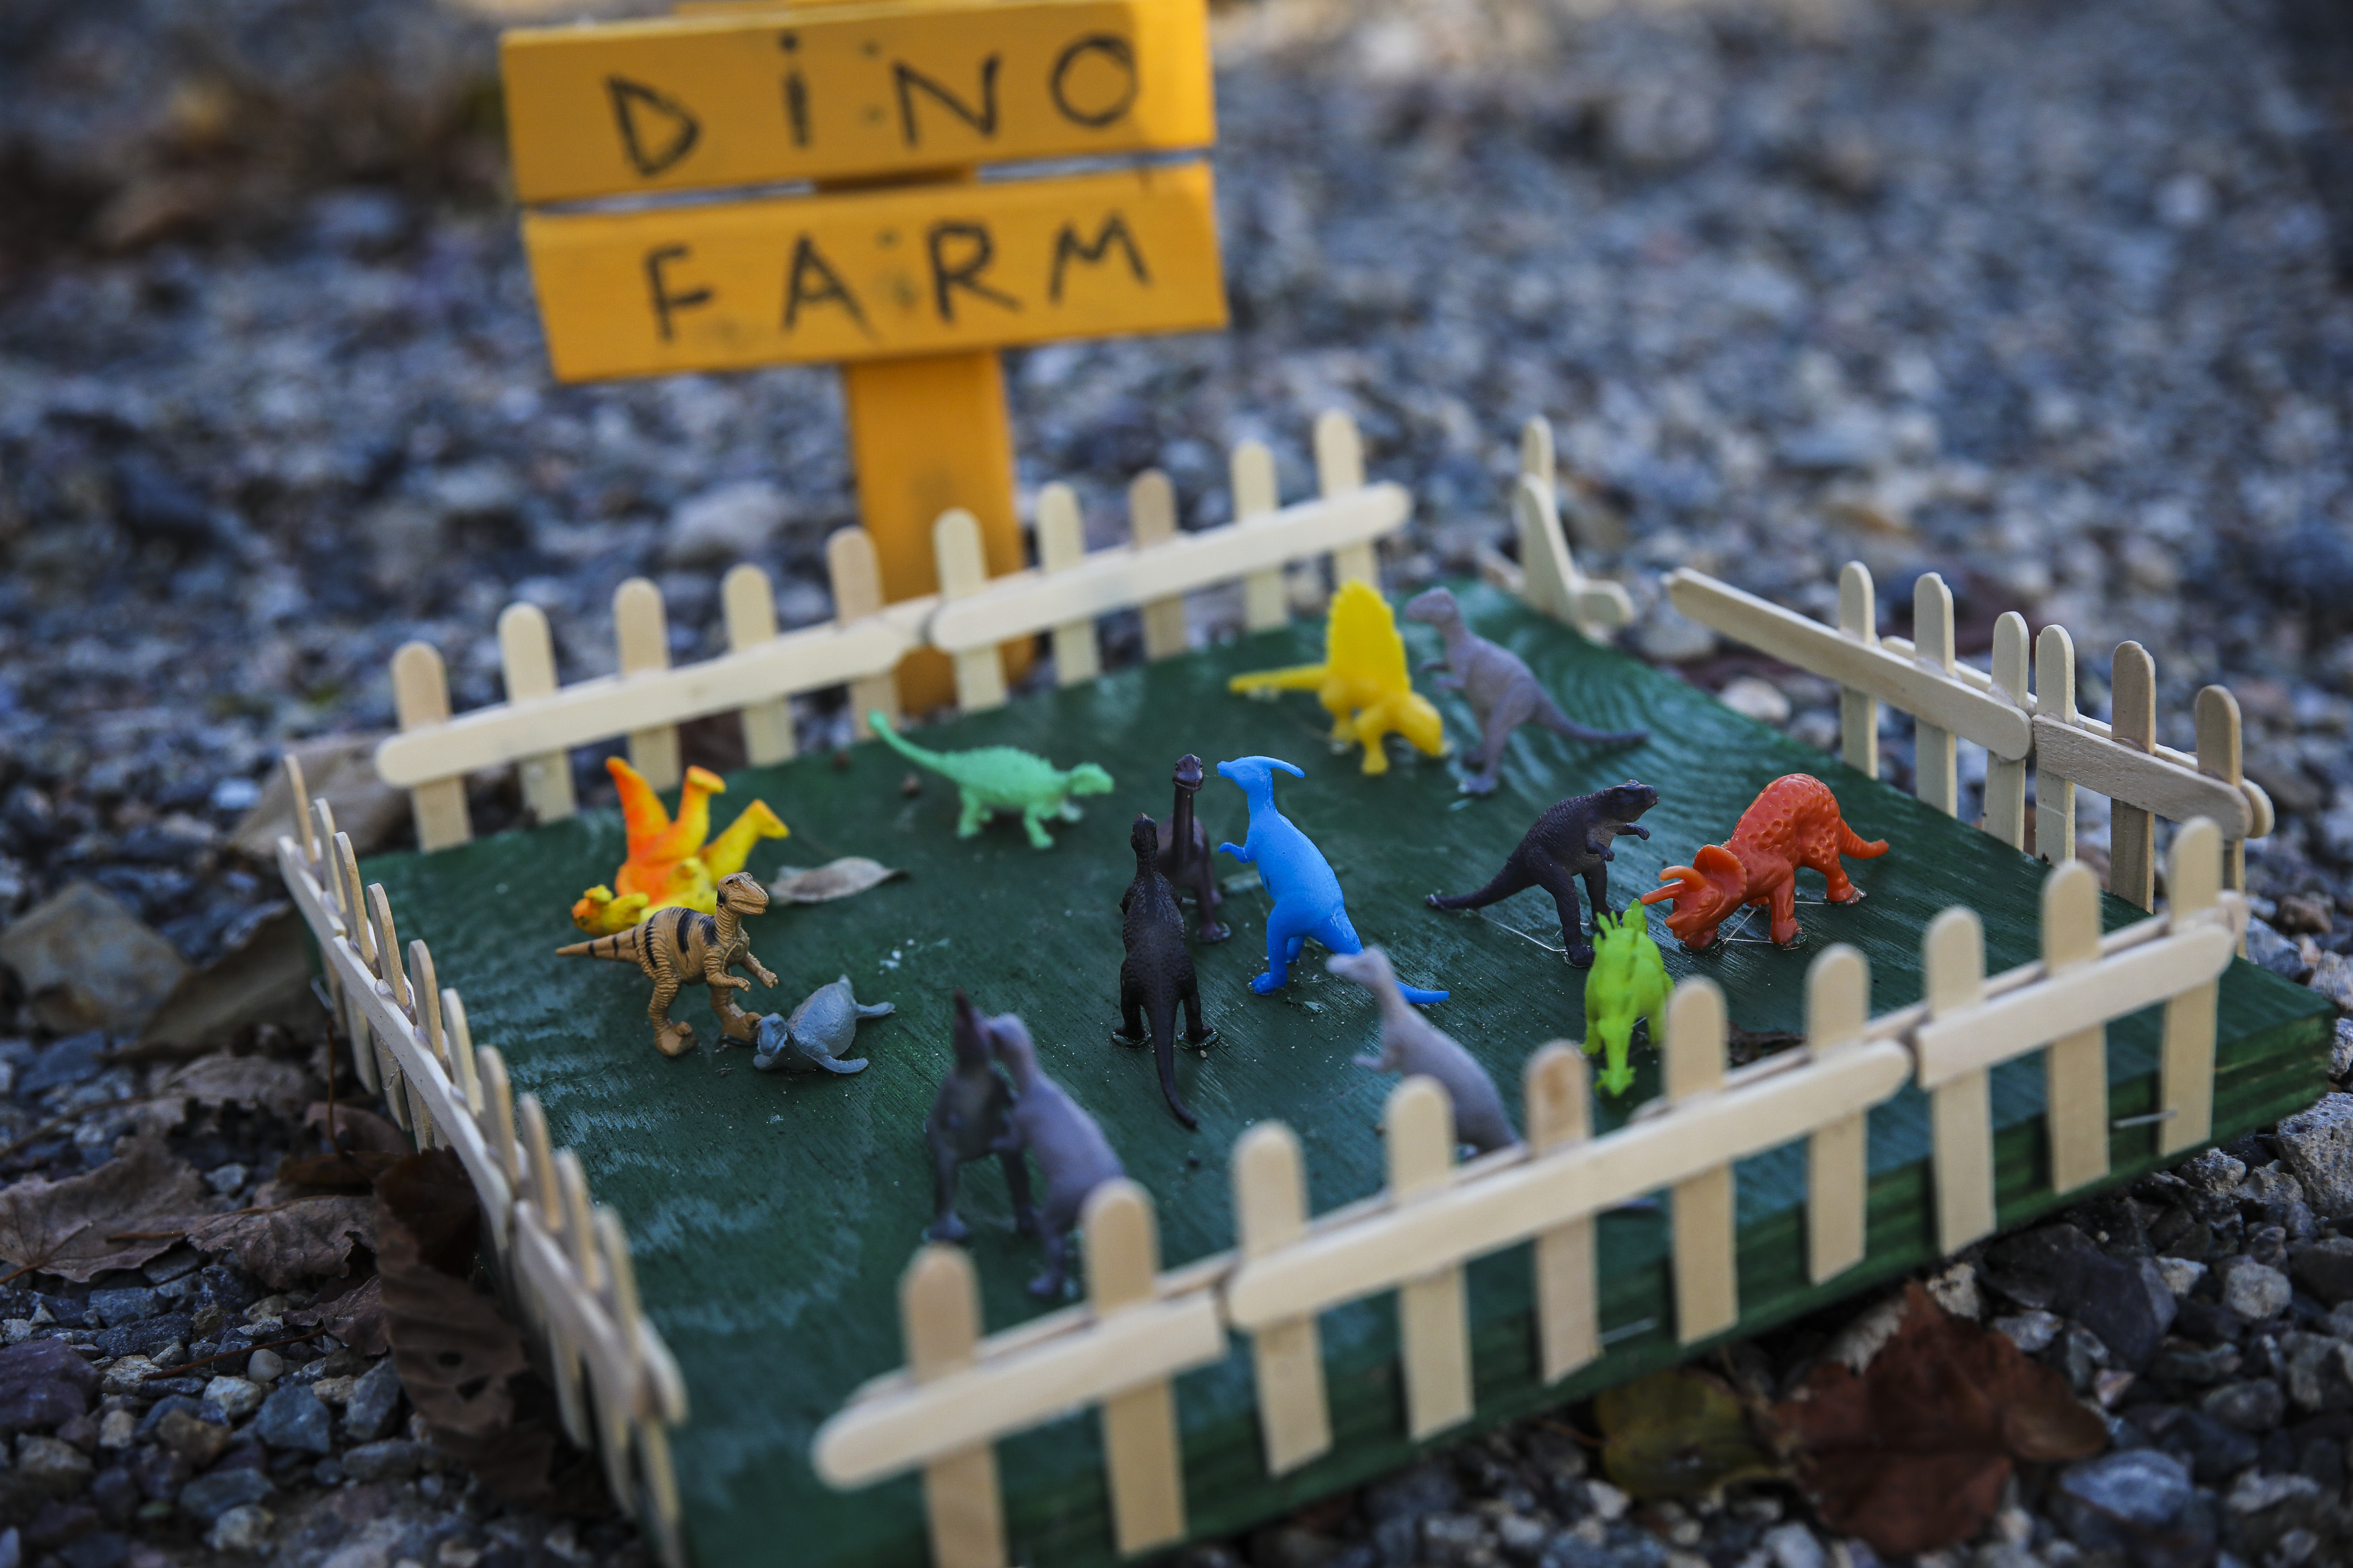 A dinosaur farm appeared in "Elfland" in Somerville. 